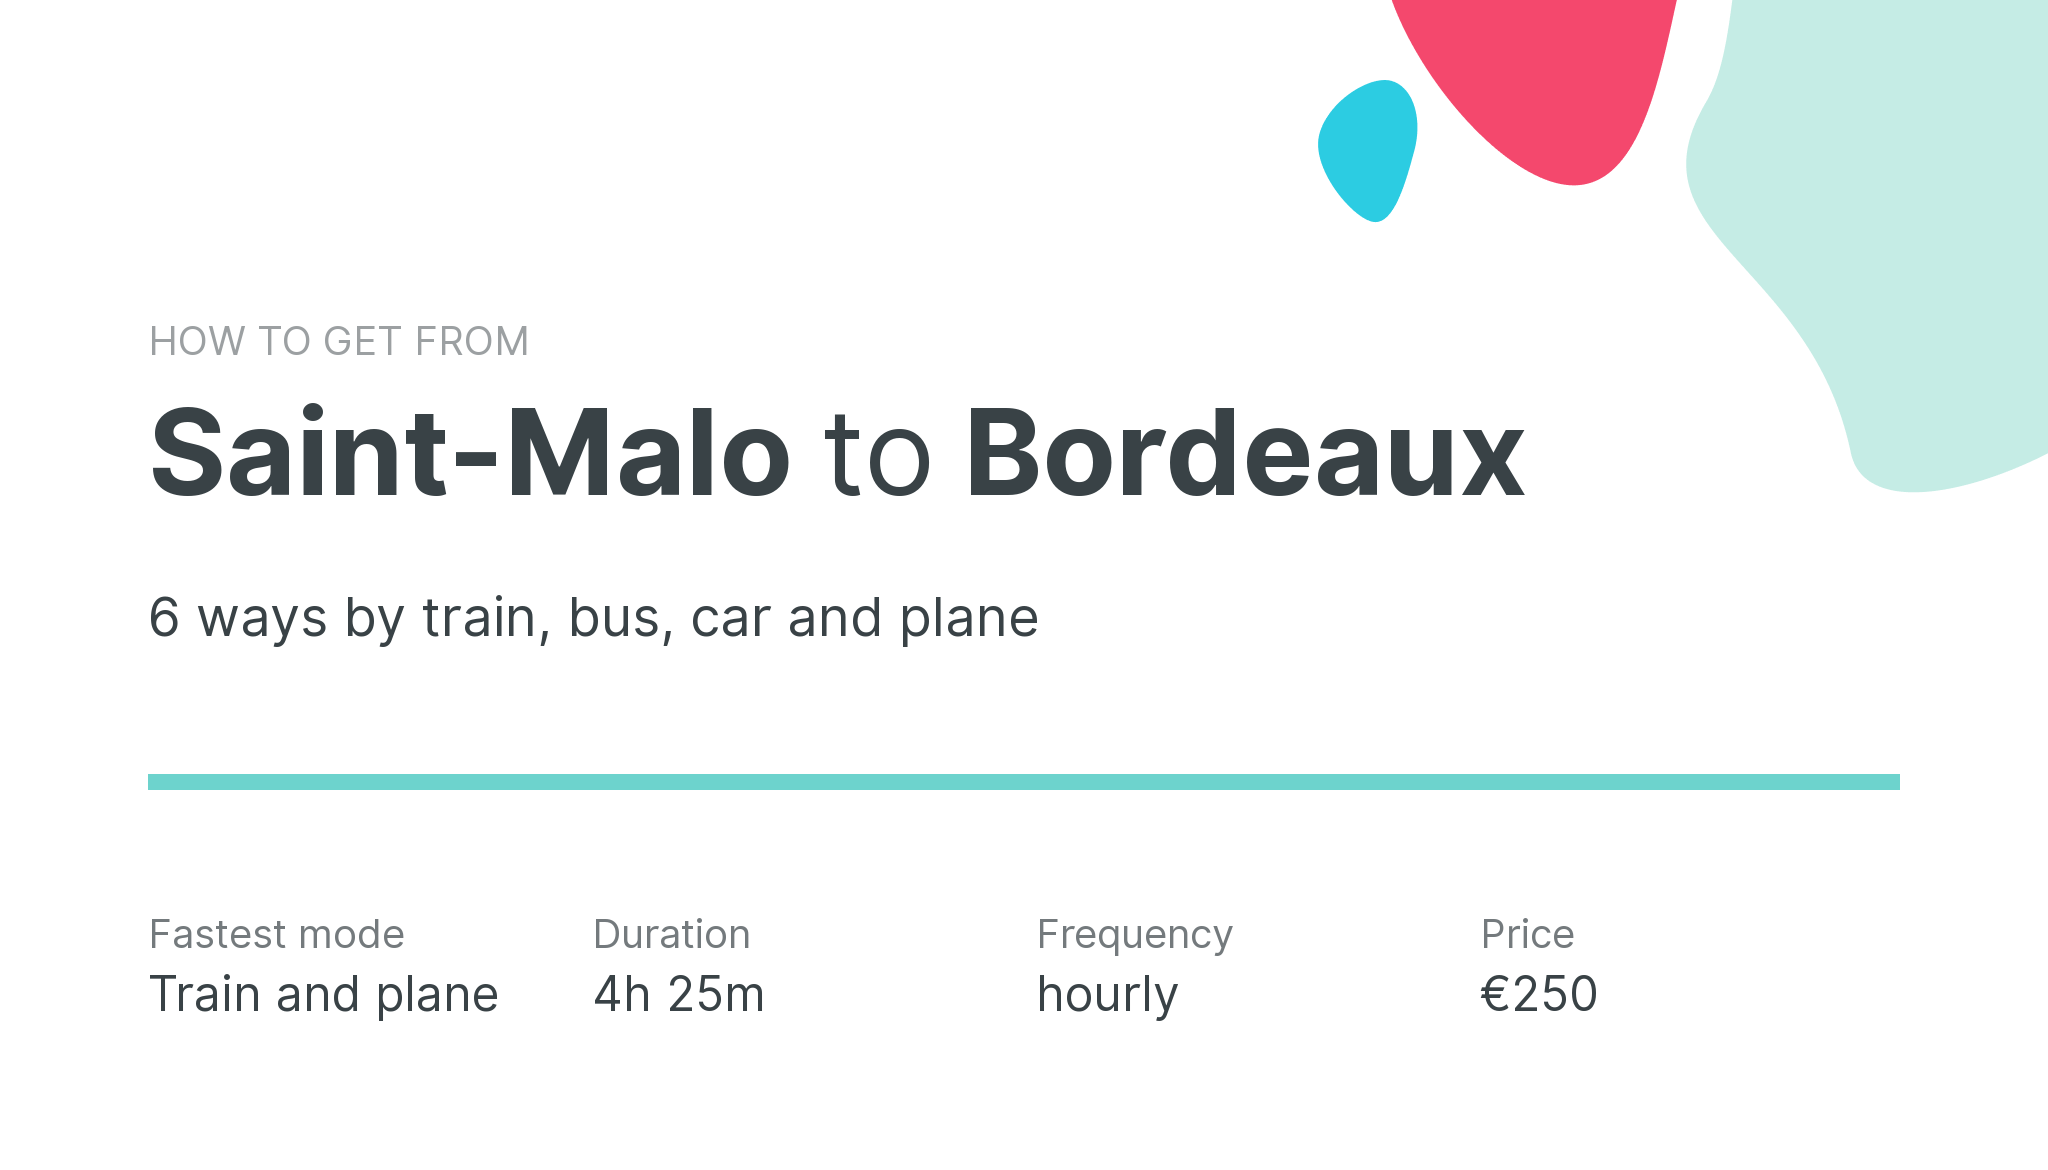 How do I get from Saint-Malo to Bordeaux